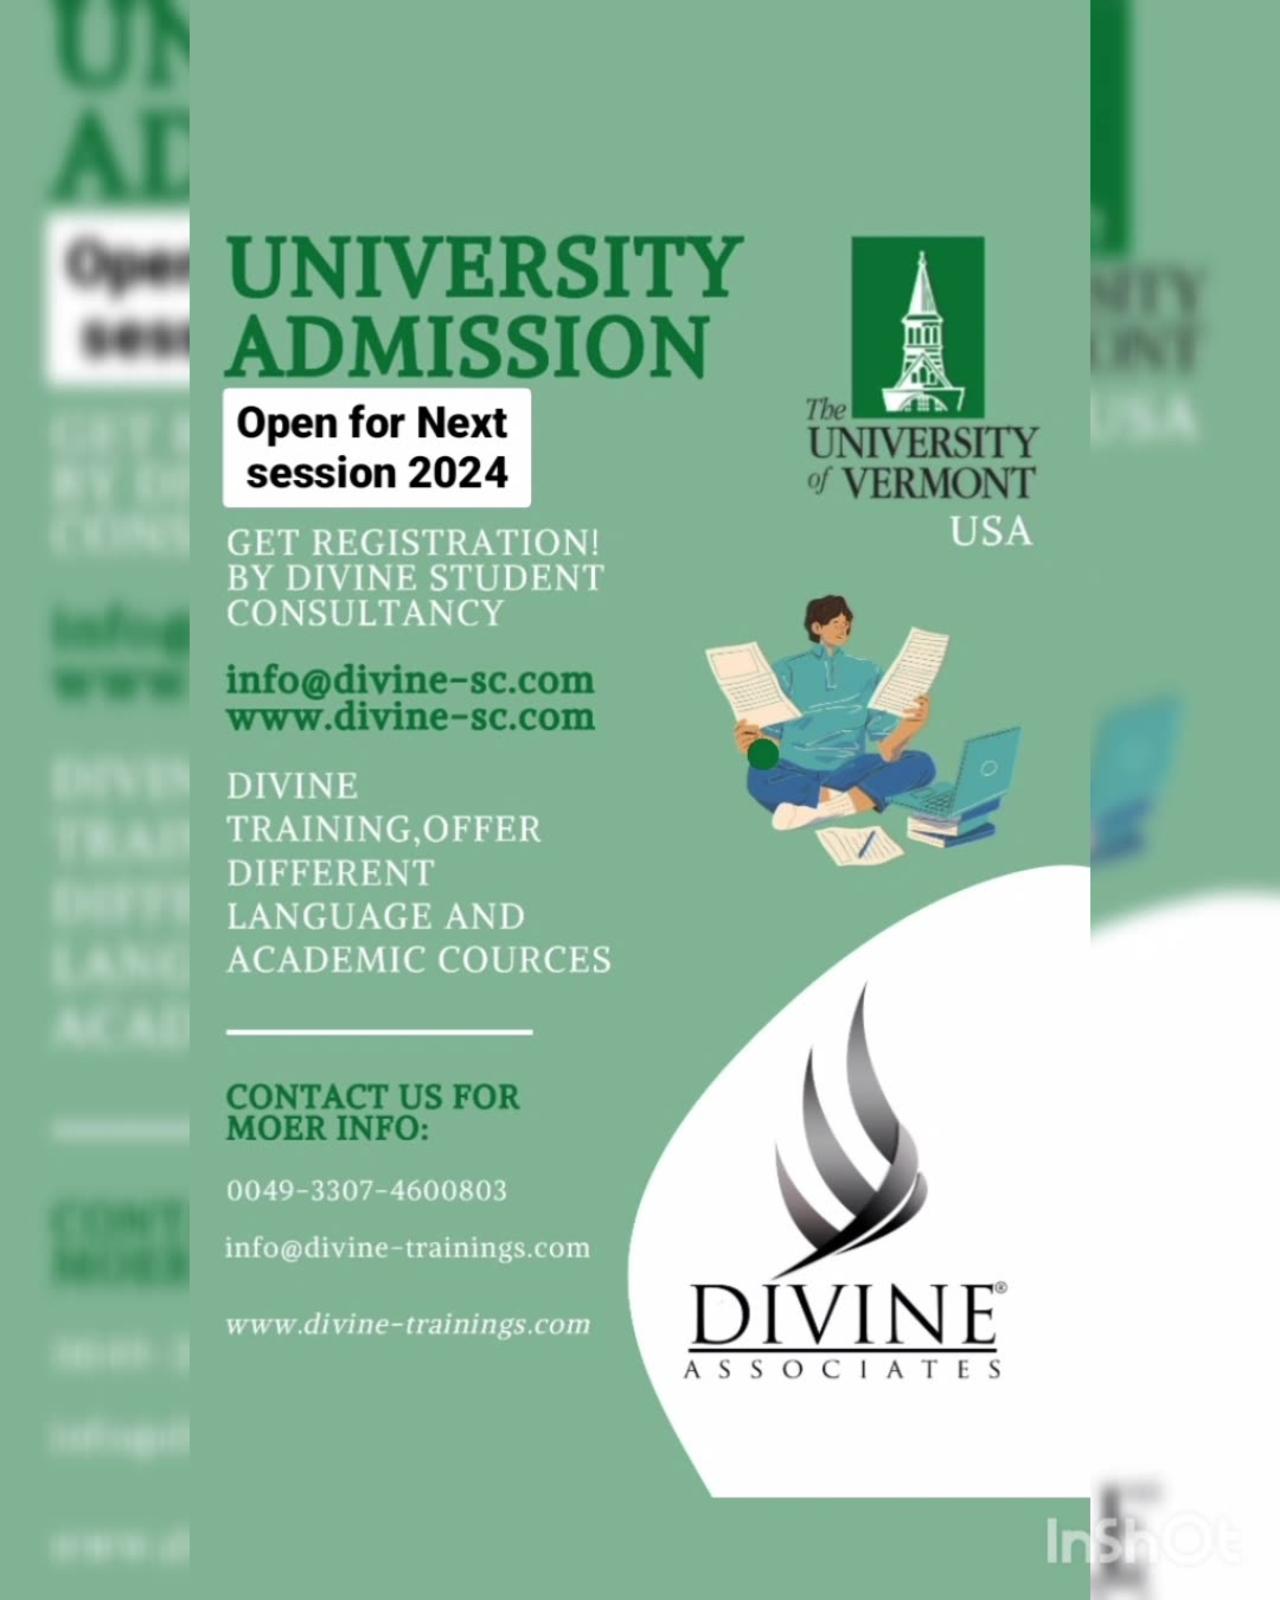 University of Vermont USA Admission Open 2024